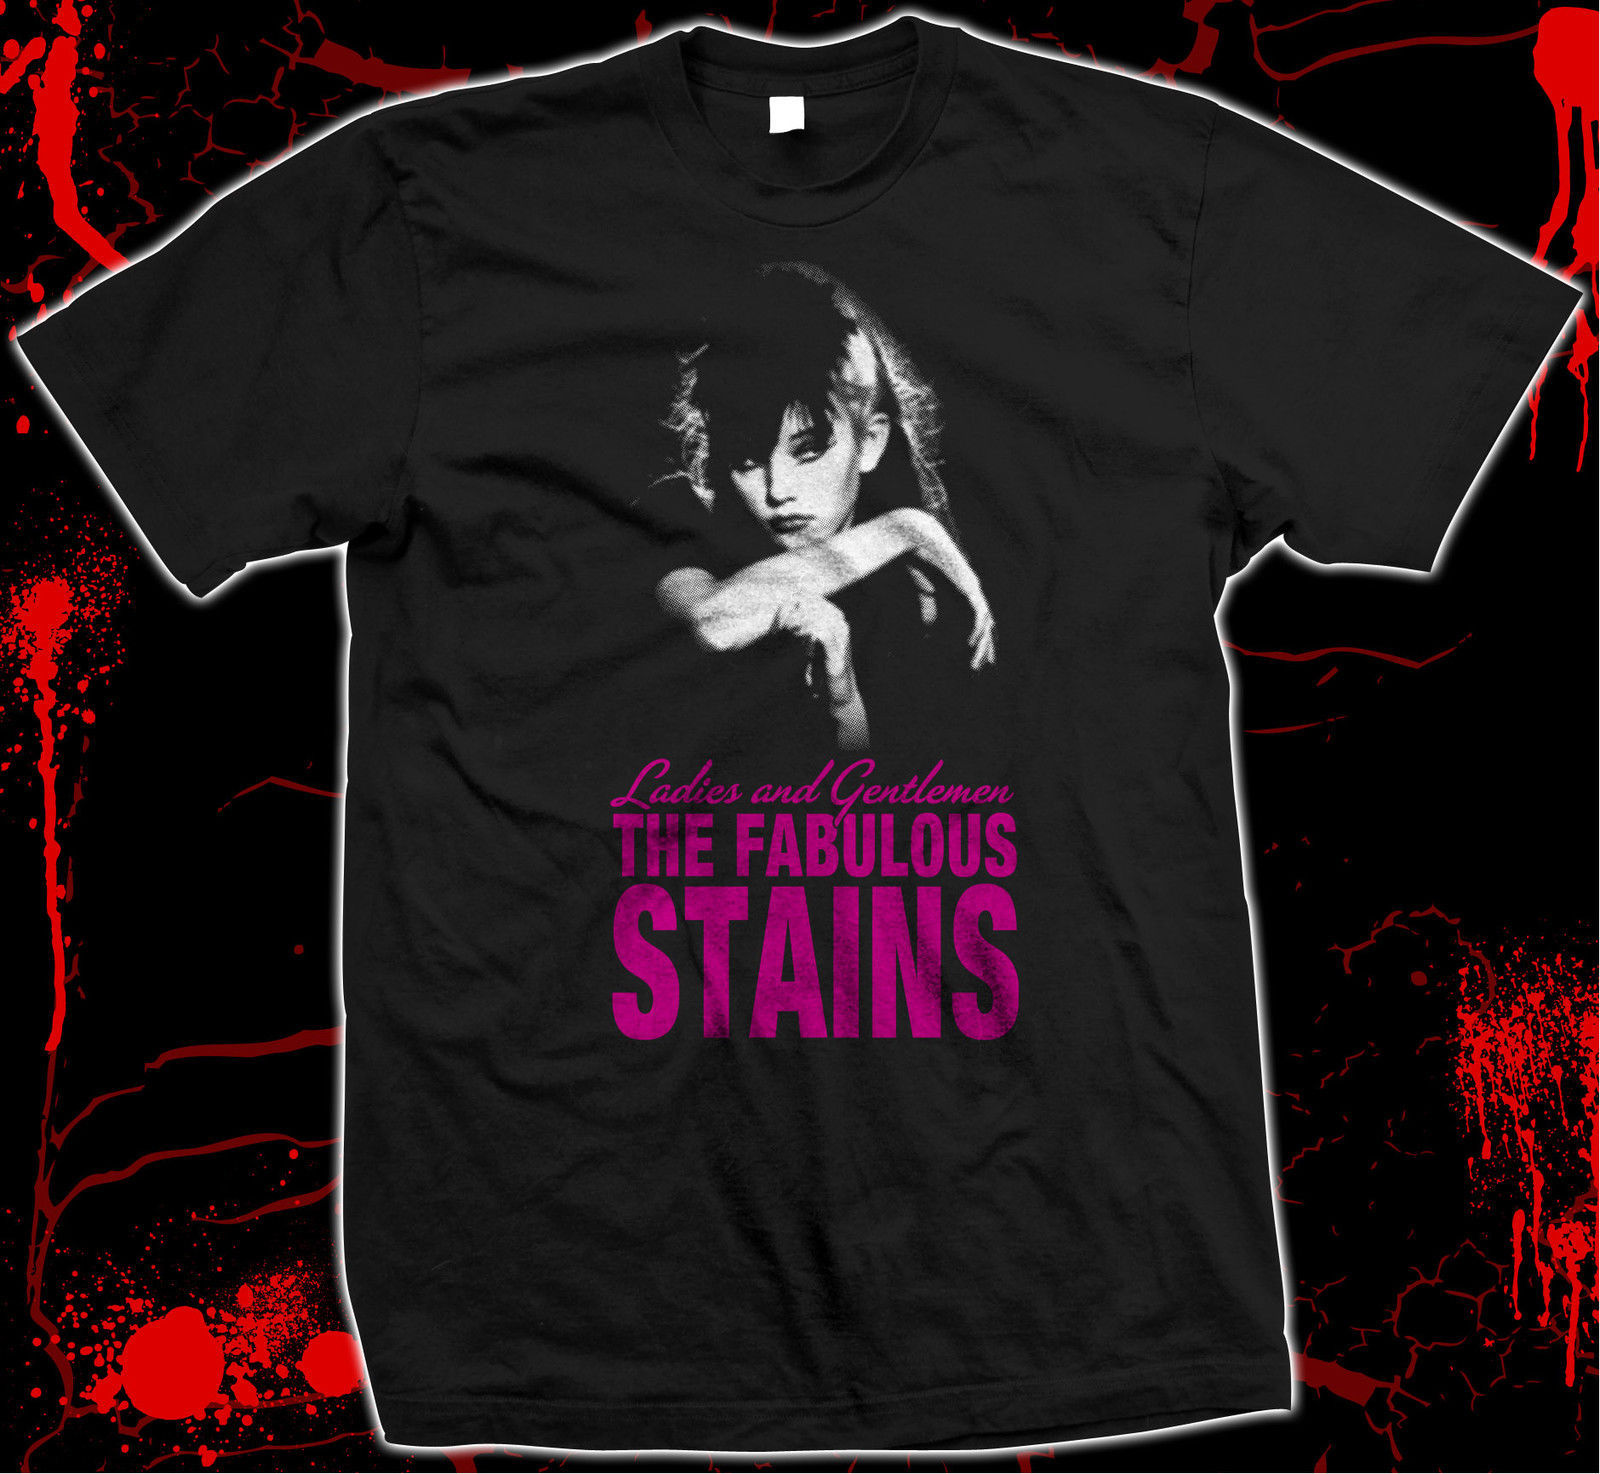 Ladies and Gentleman the Fabulous Stains - punk - 100% cotton t-shirt